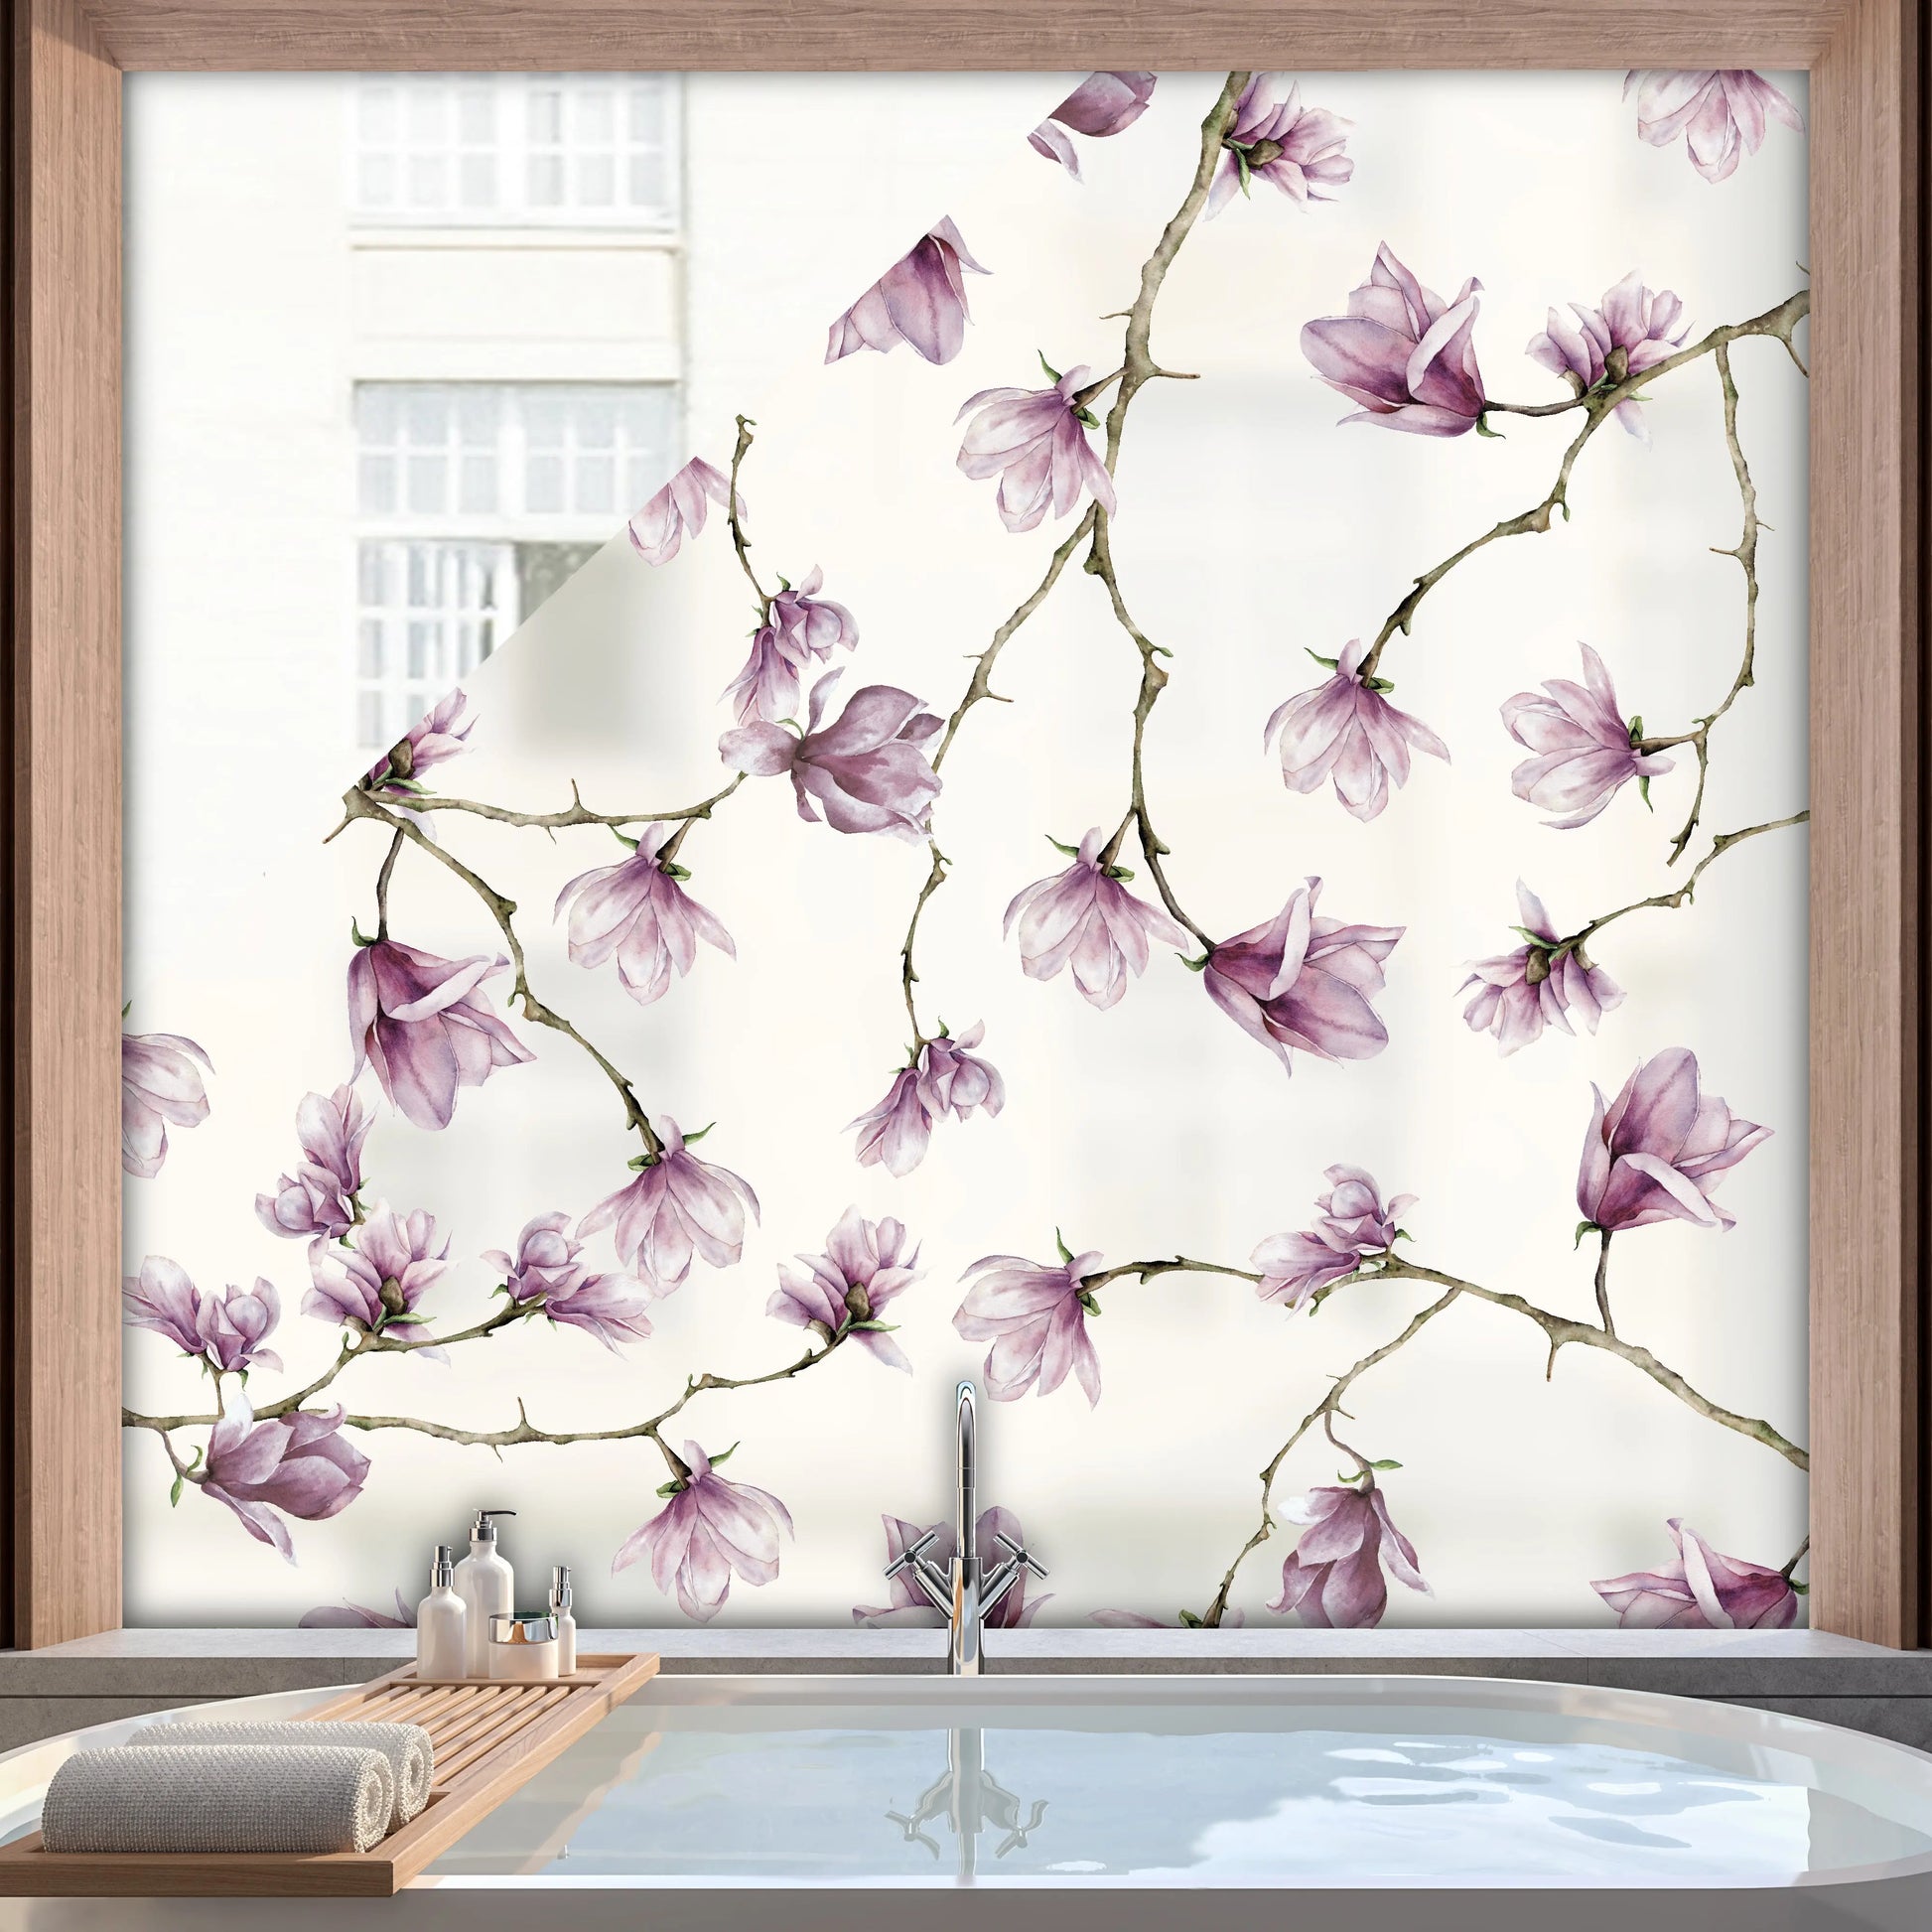 Privacy Window Magnolia Privacy Frosted Window Panel Dizzy Duck Designs